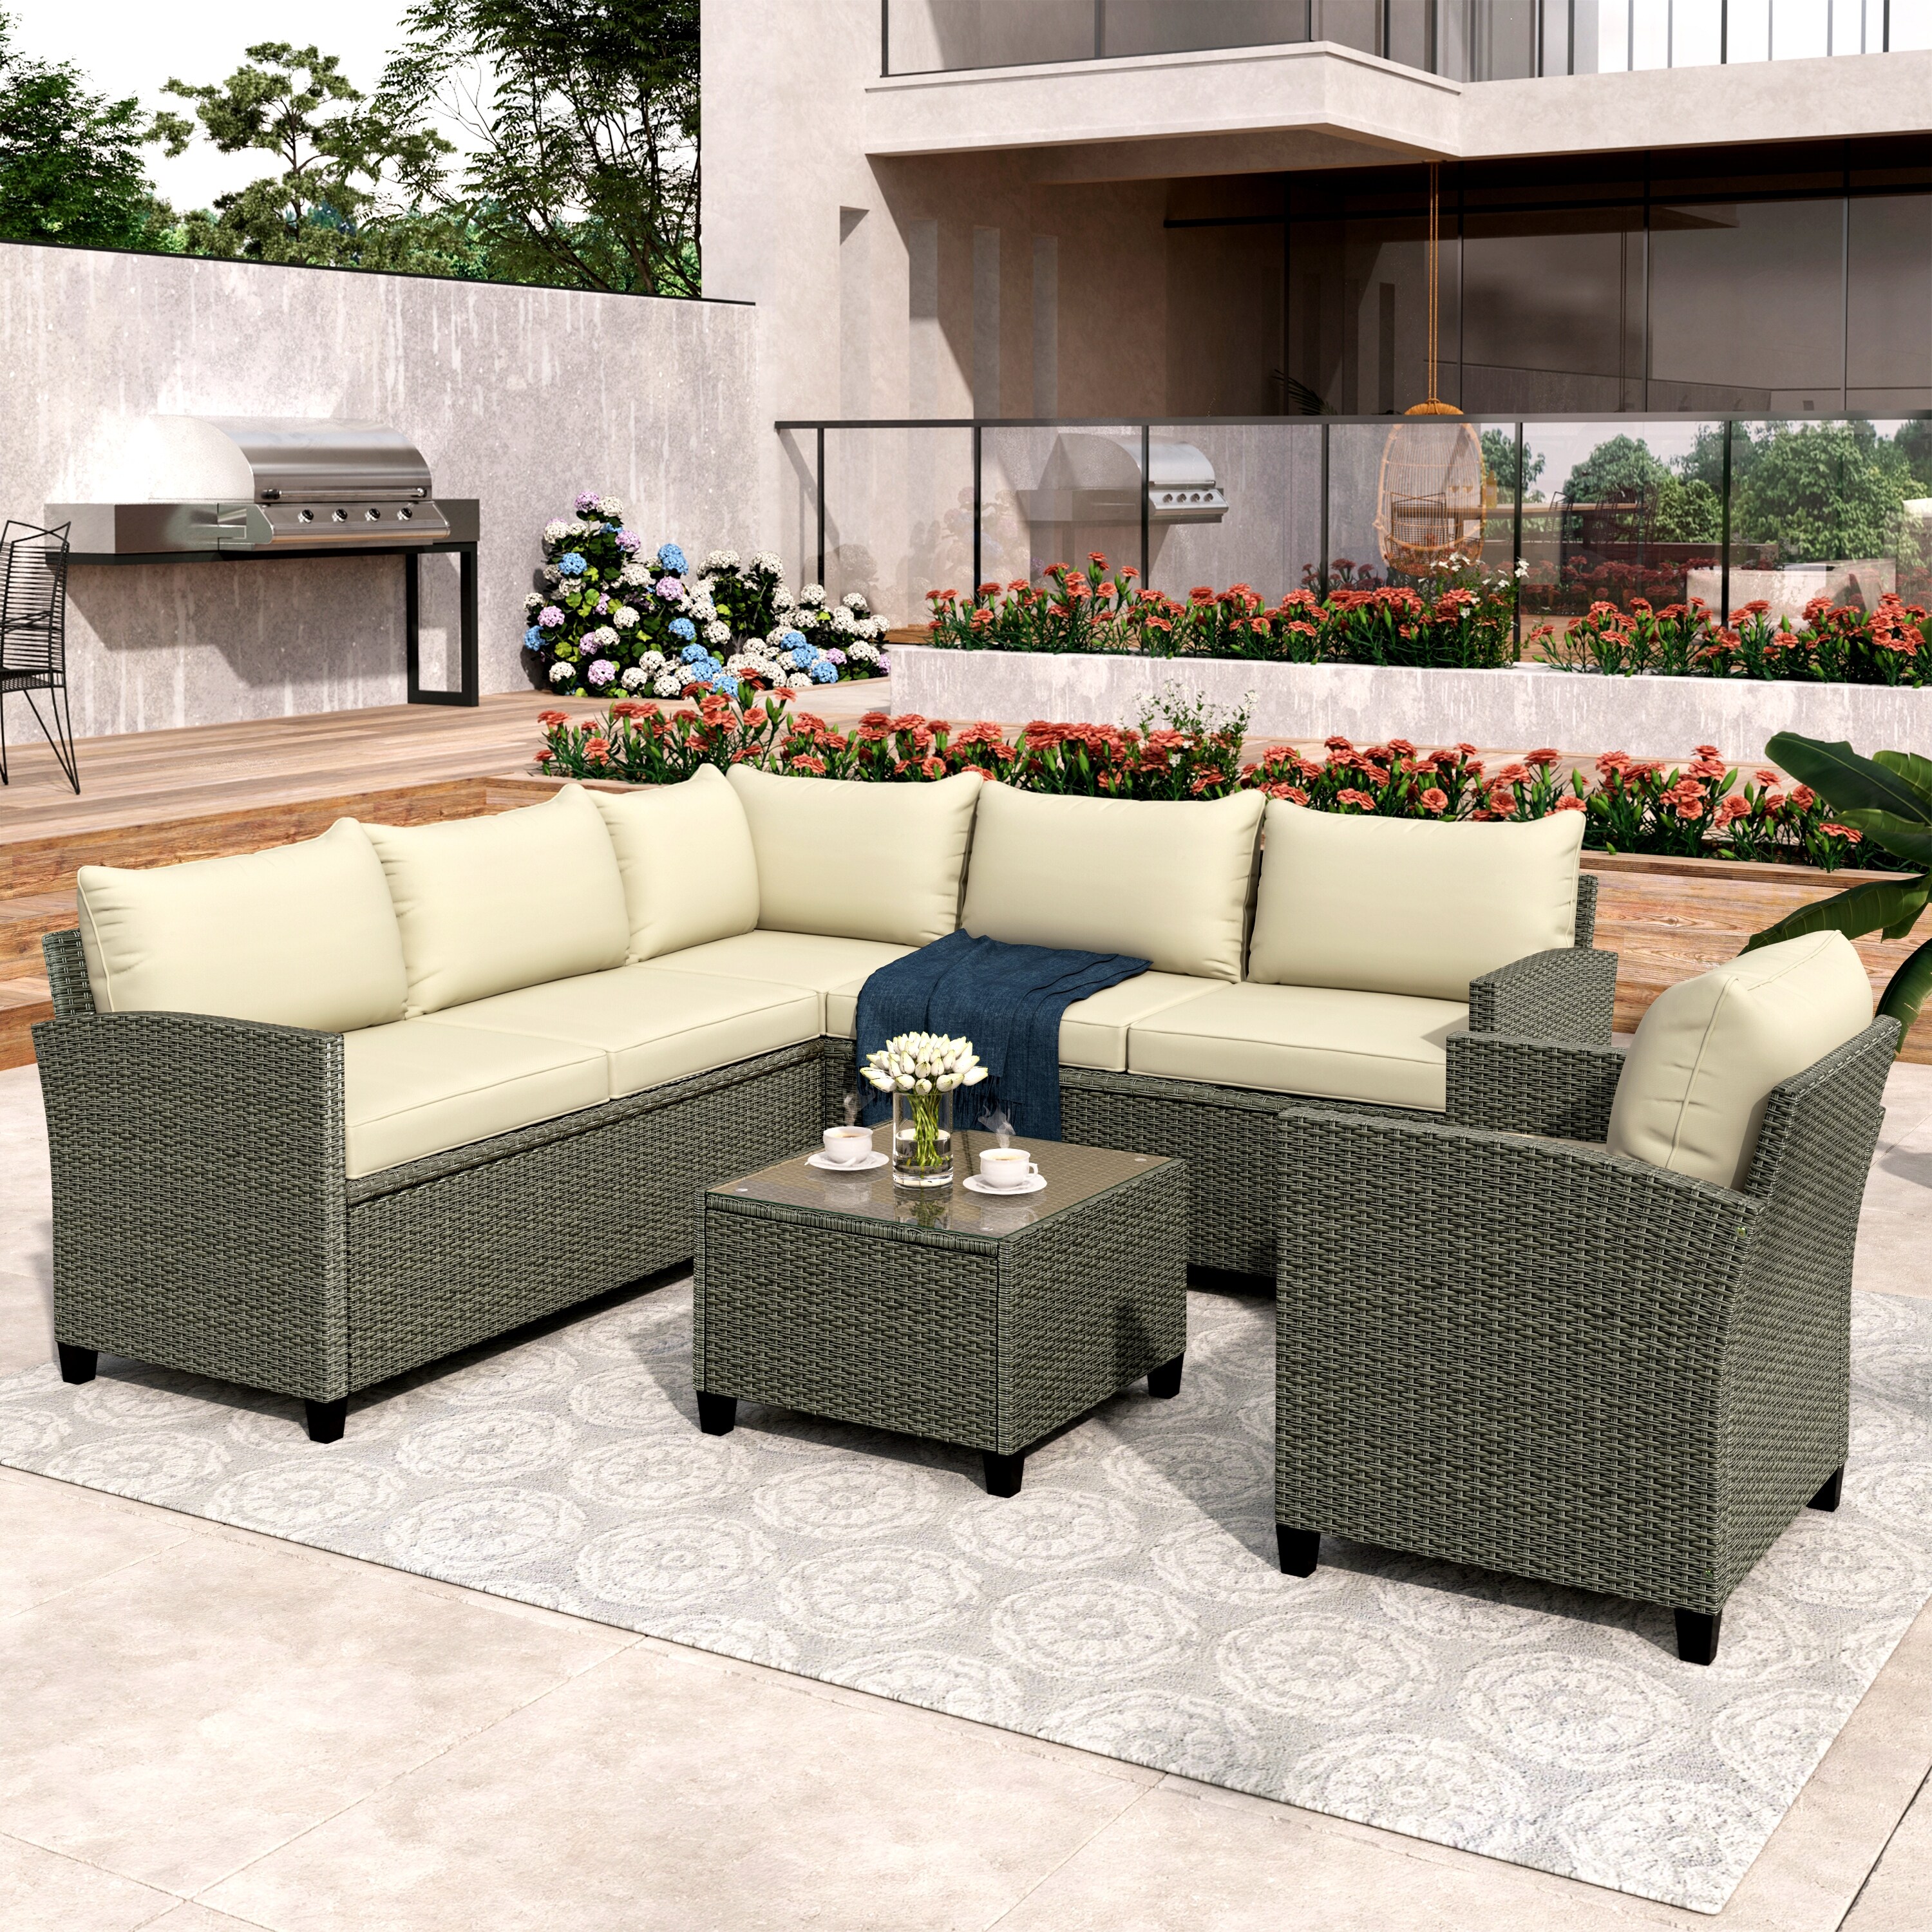 5 Piece Patio Outdoor Conversation Set With Coffee Table  Cushions And Single Chair